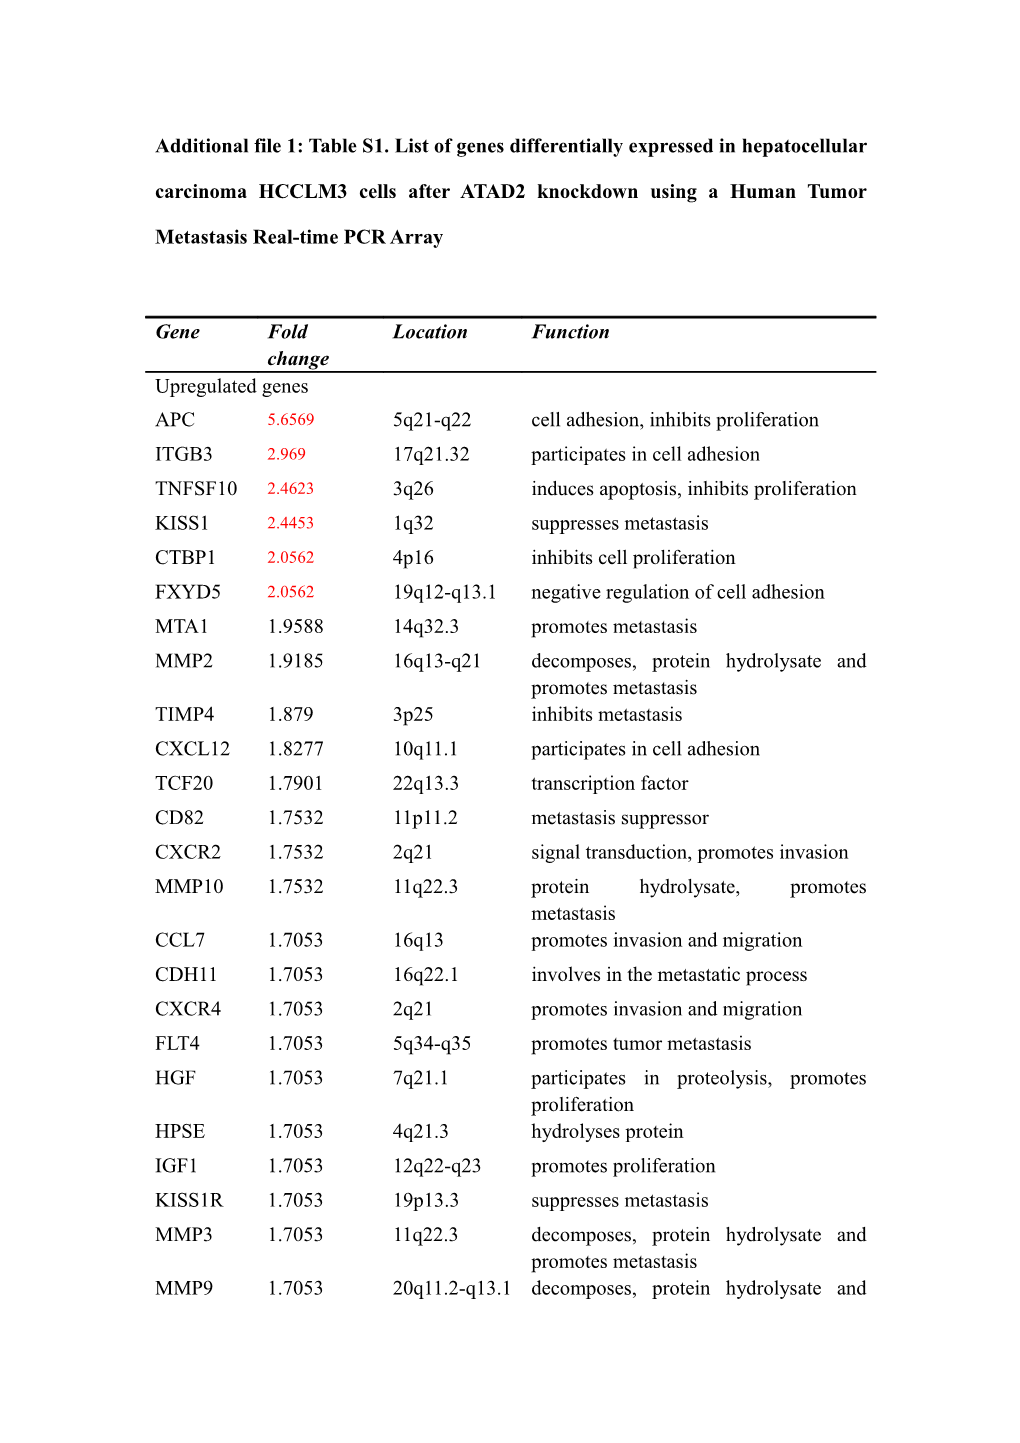 Additional File 1: Table S1. List of Genes Differentially Expressed in Hepatocellular